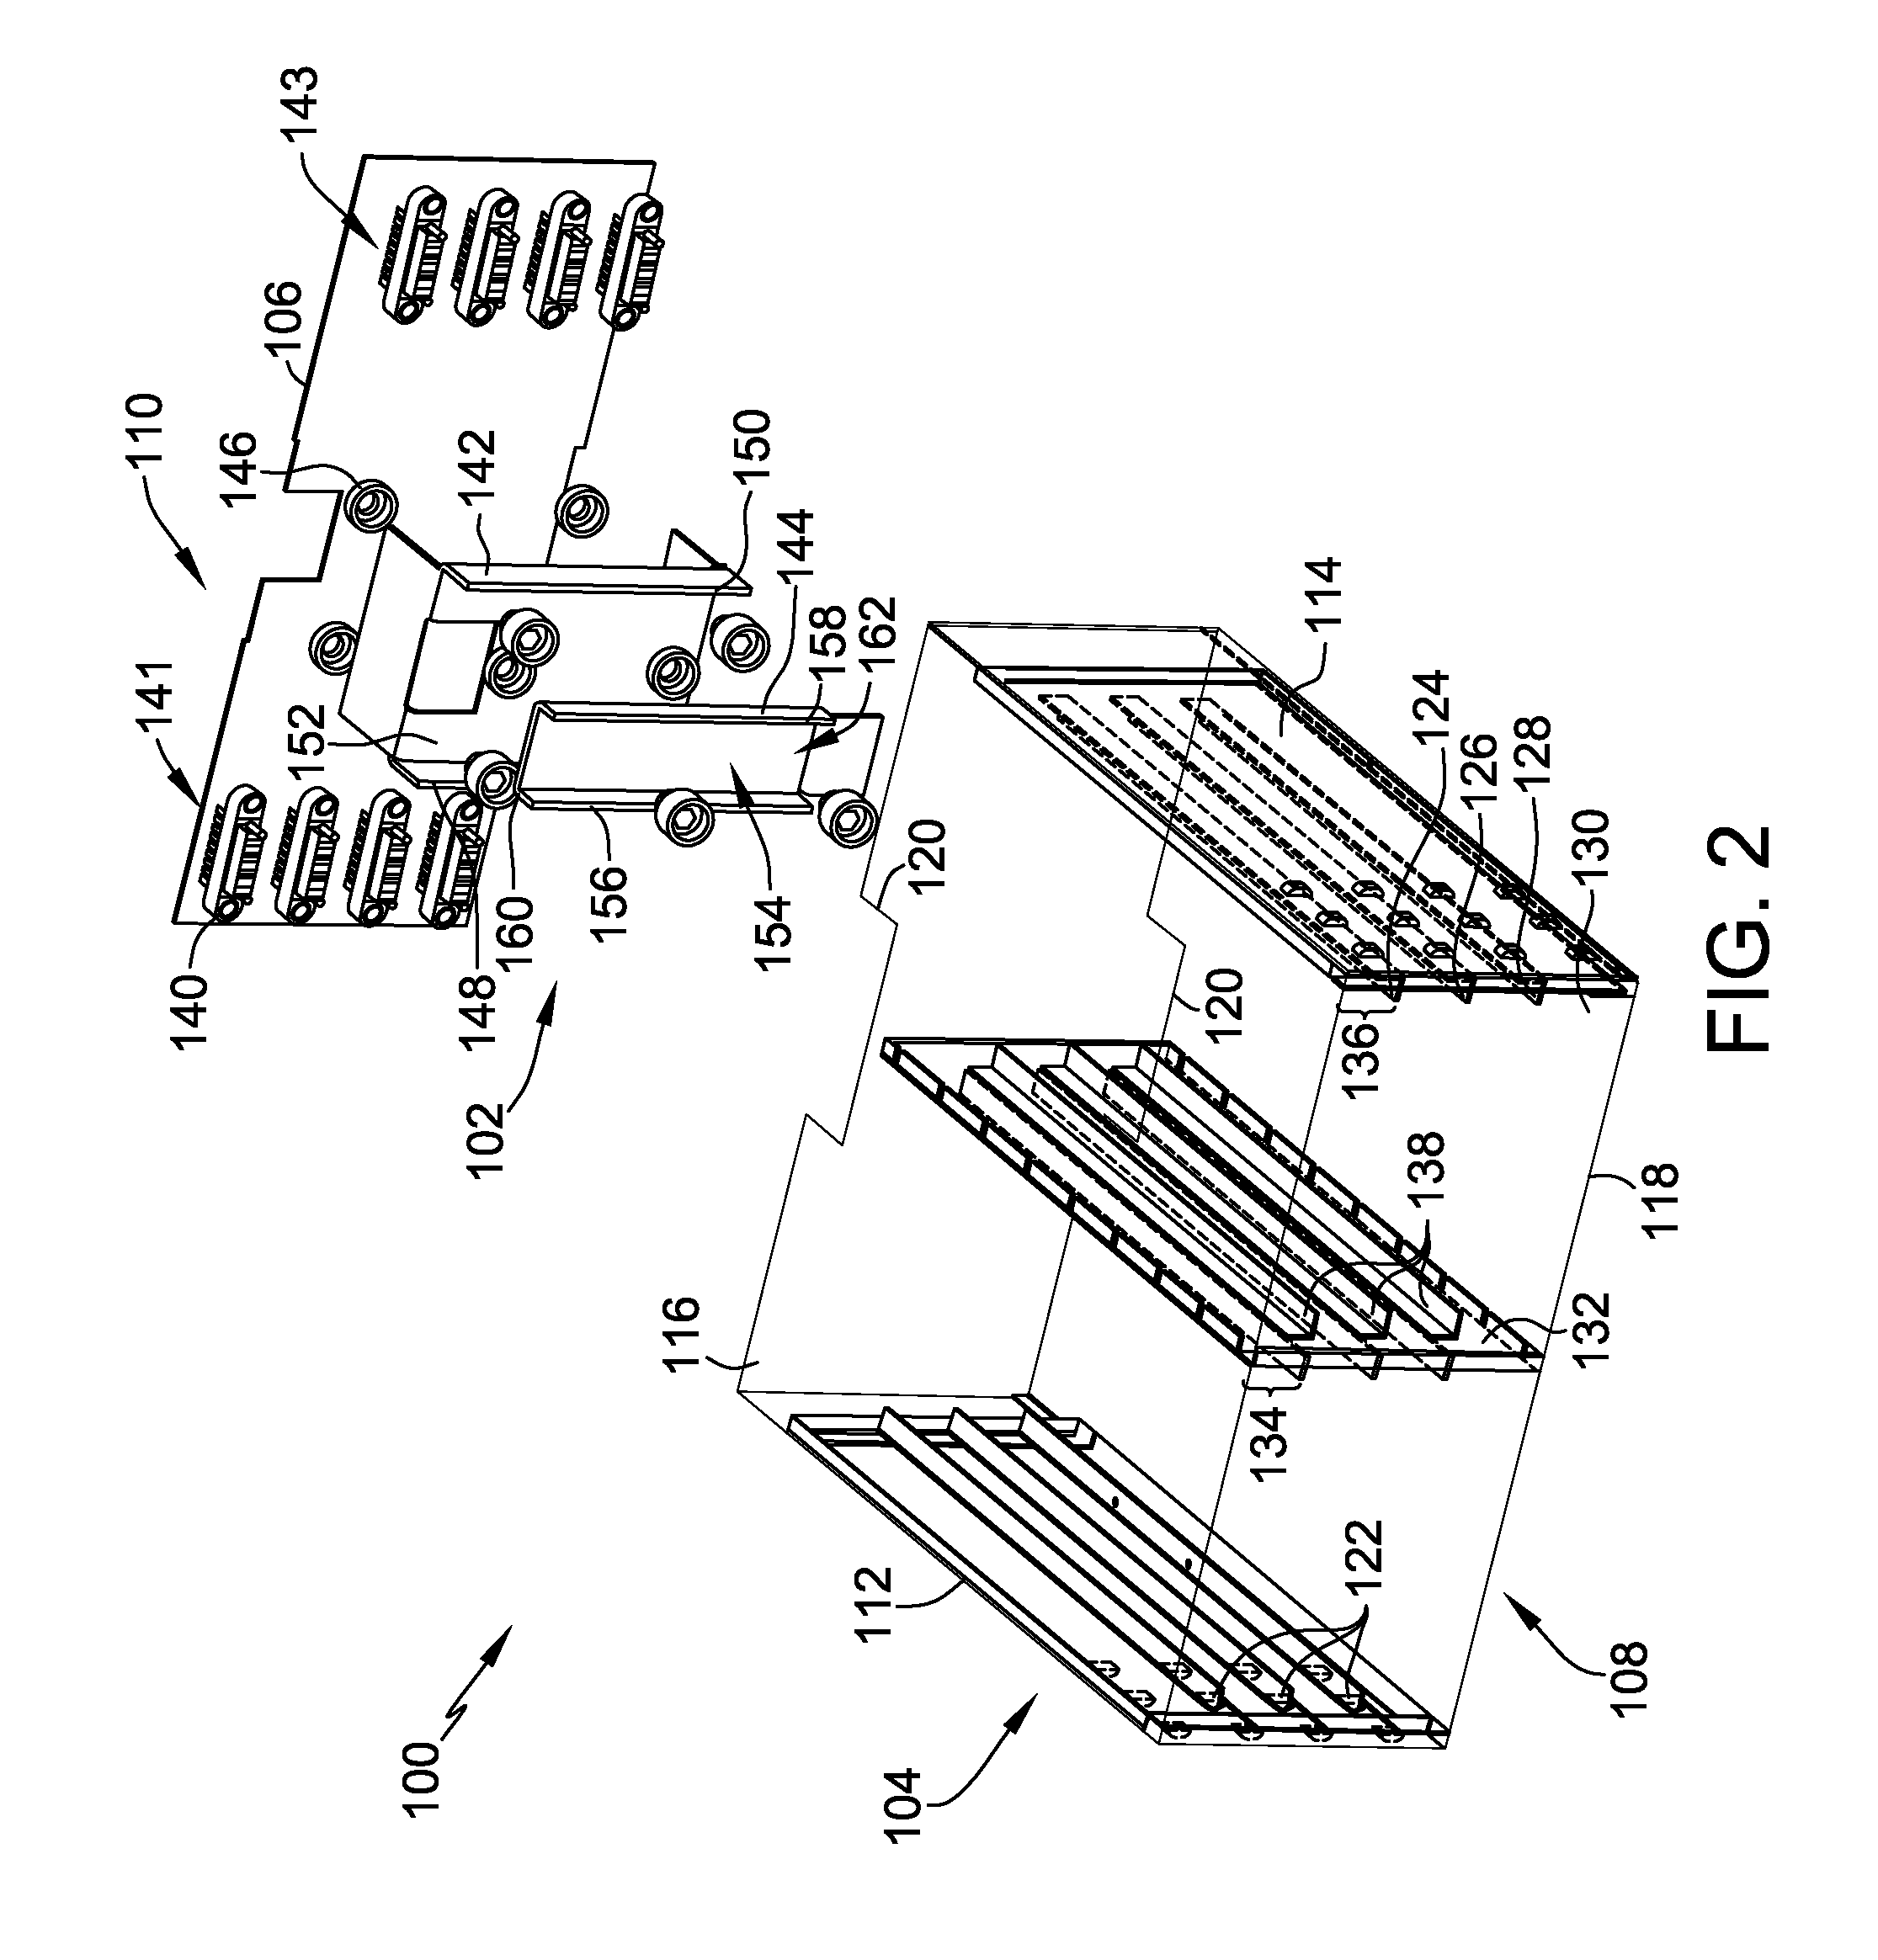 Power distribution rack bus bar assembly and method of assembling the same